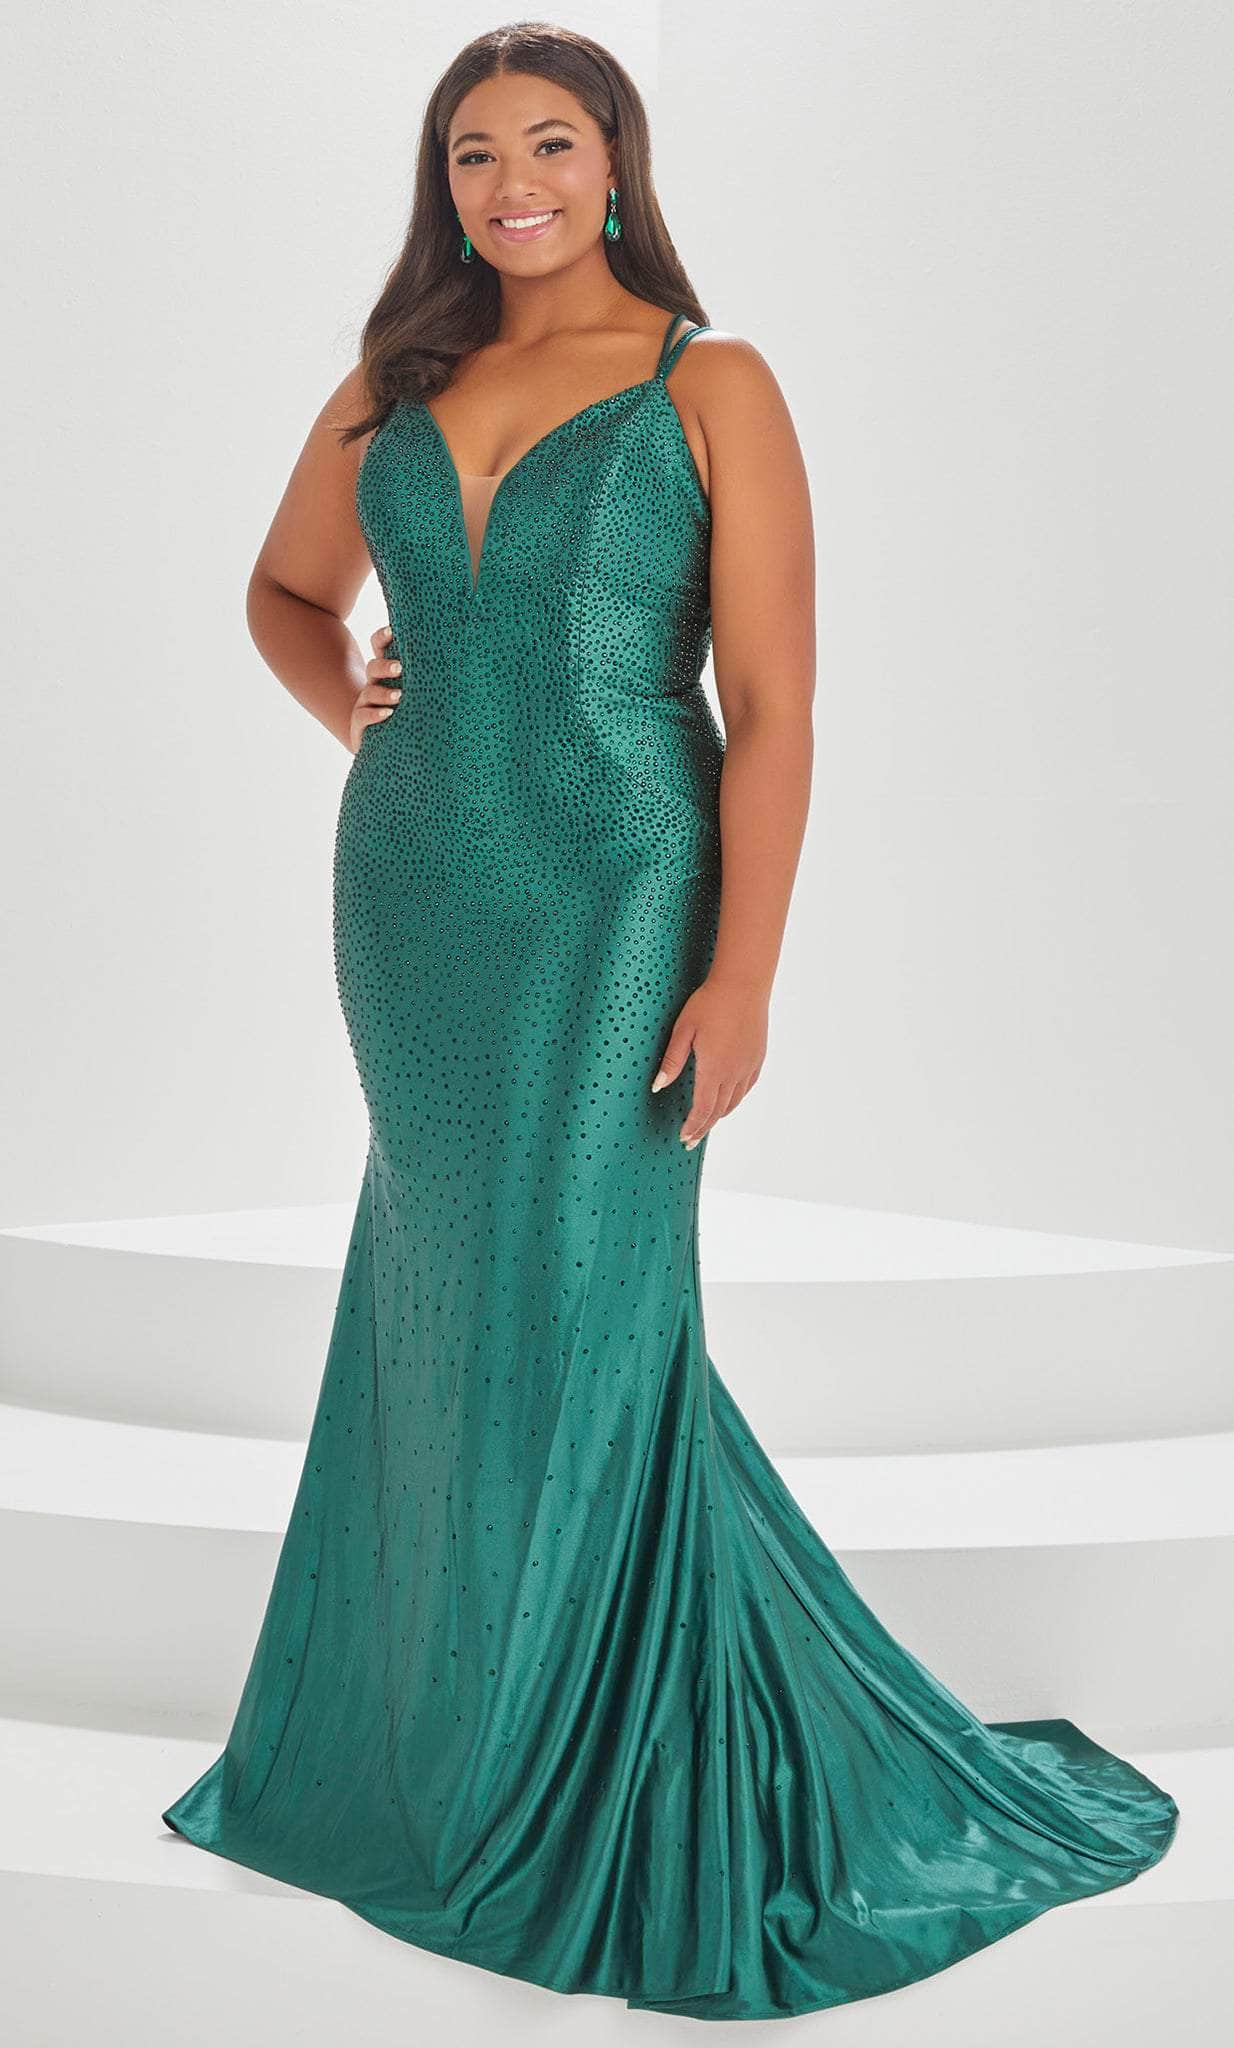 Image of Tiffany Designs by Christina Wu 16038 - Beaded Sweetheart Prom Gown